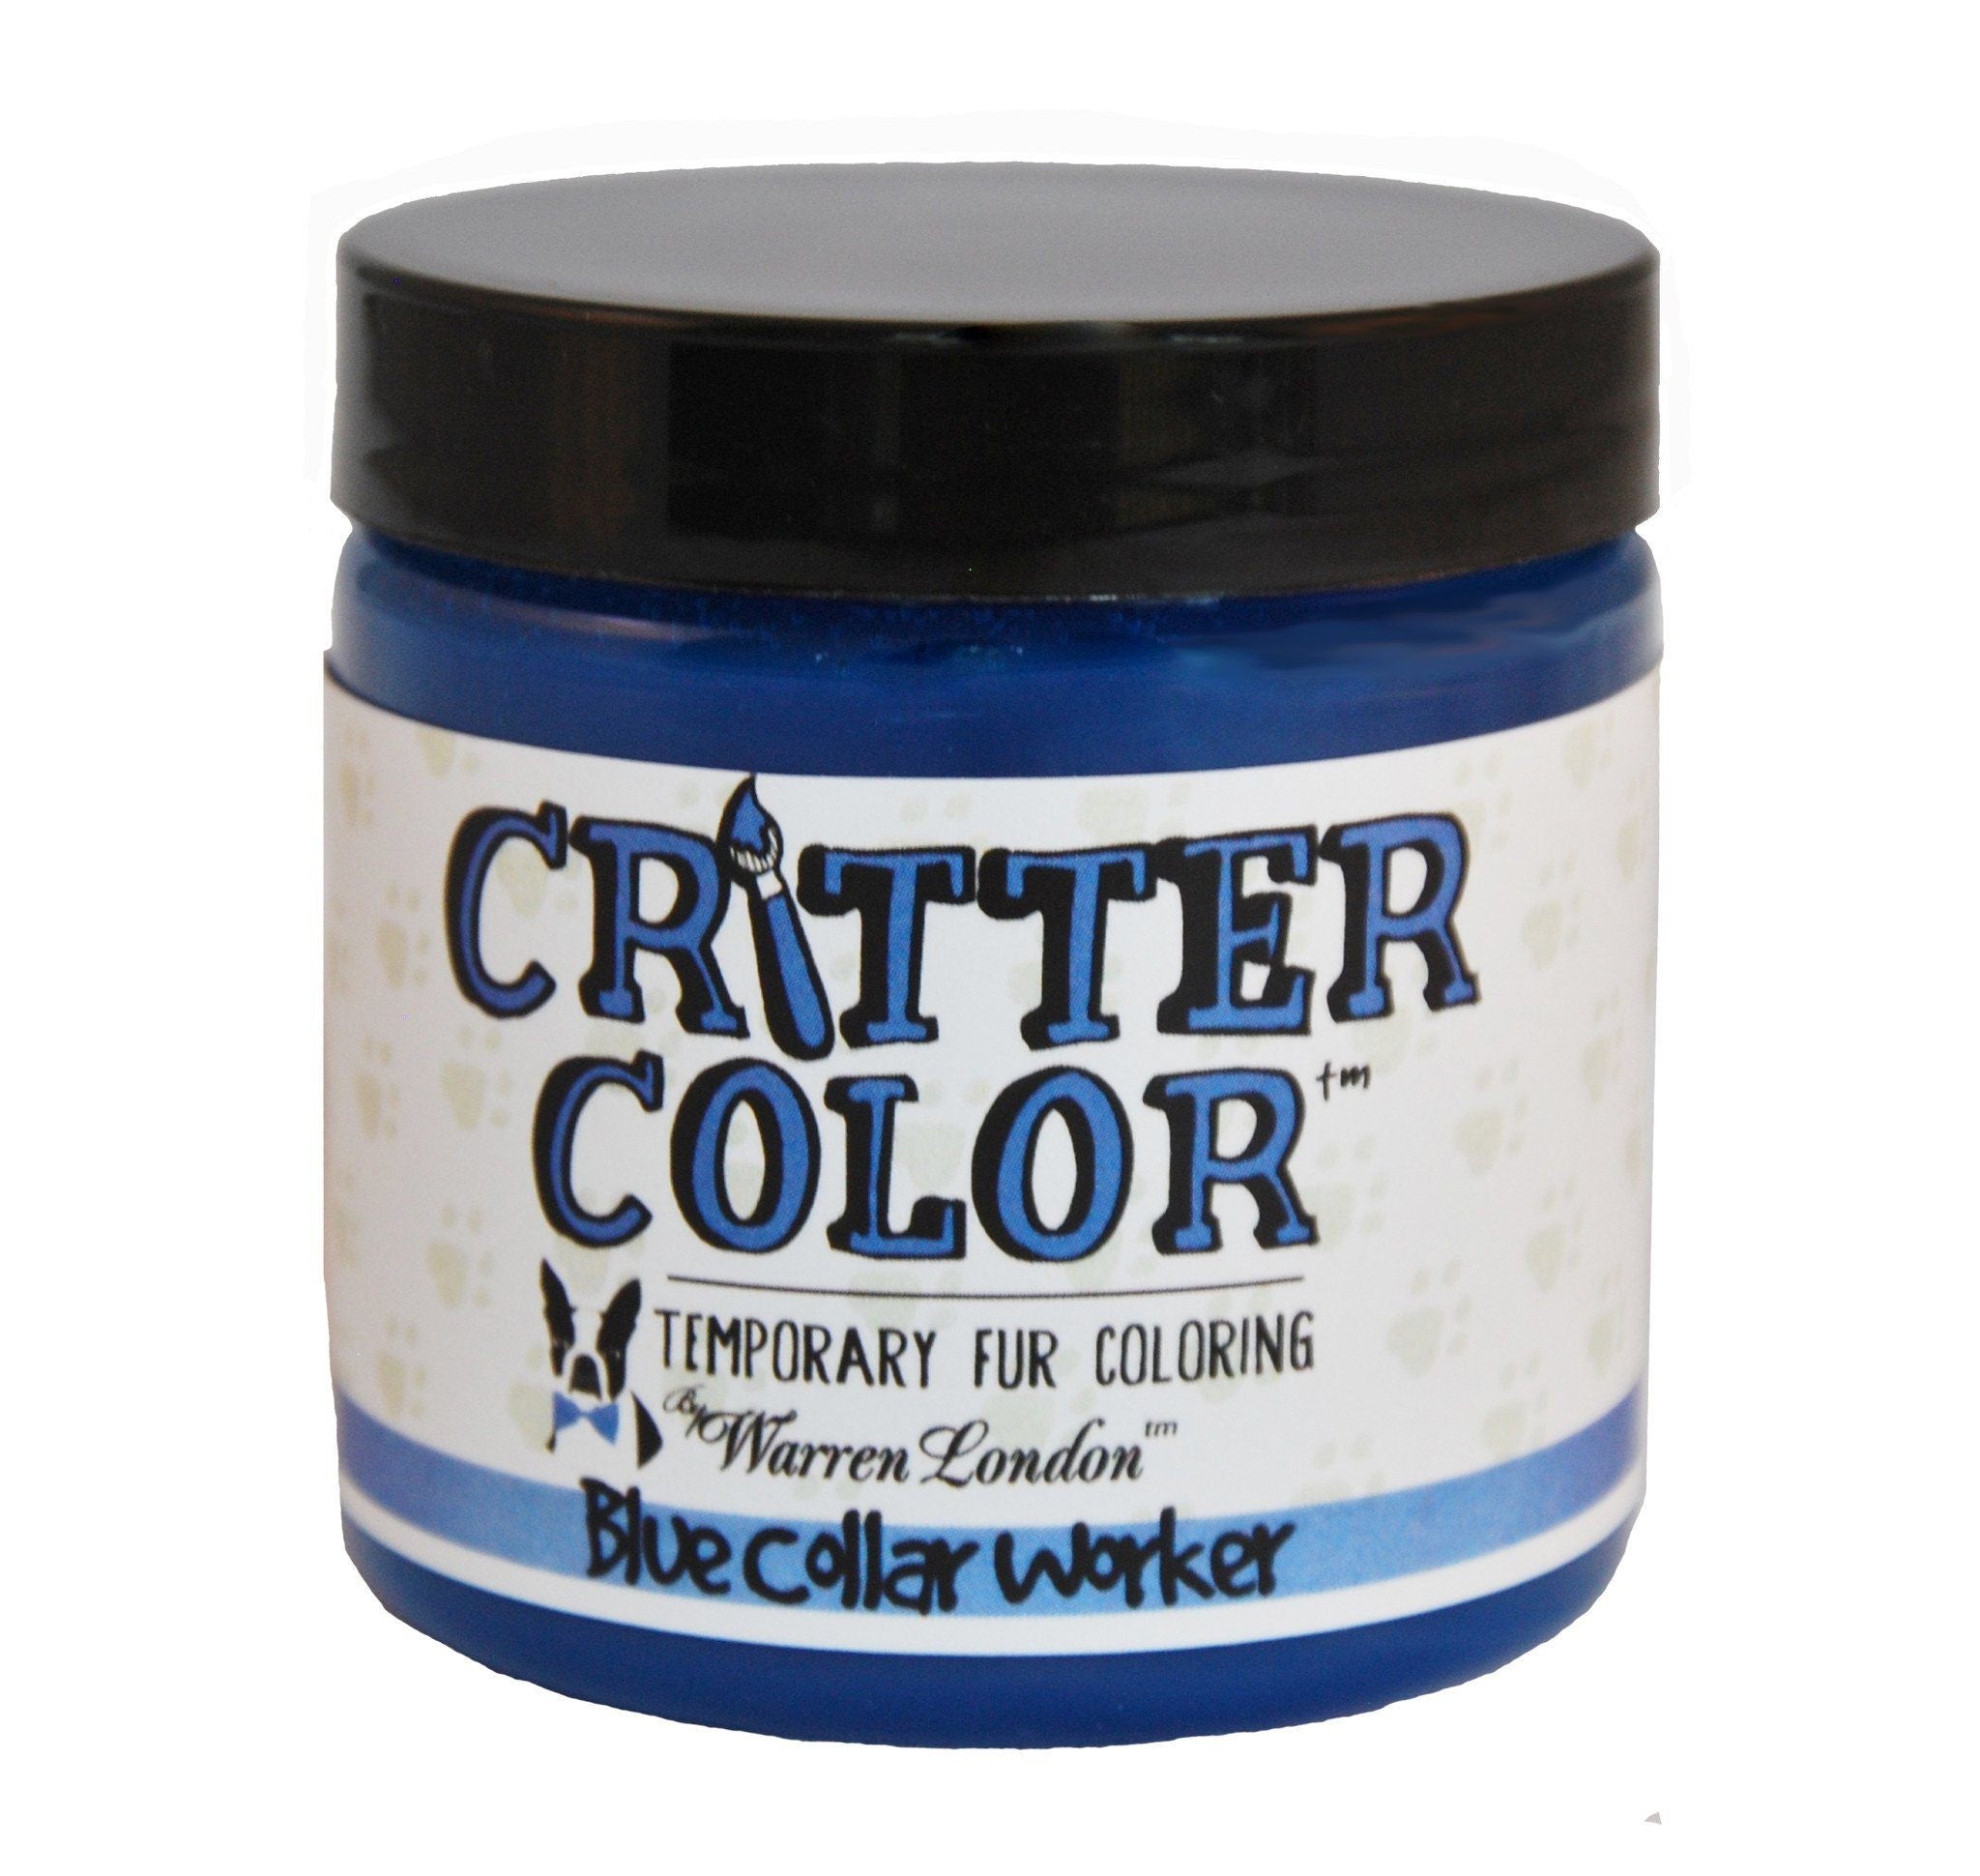 Critter Color - Temporary Pet Fur Coloring/Dog Dye Spa Product Warren London Blue Collar Worker 